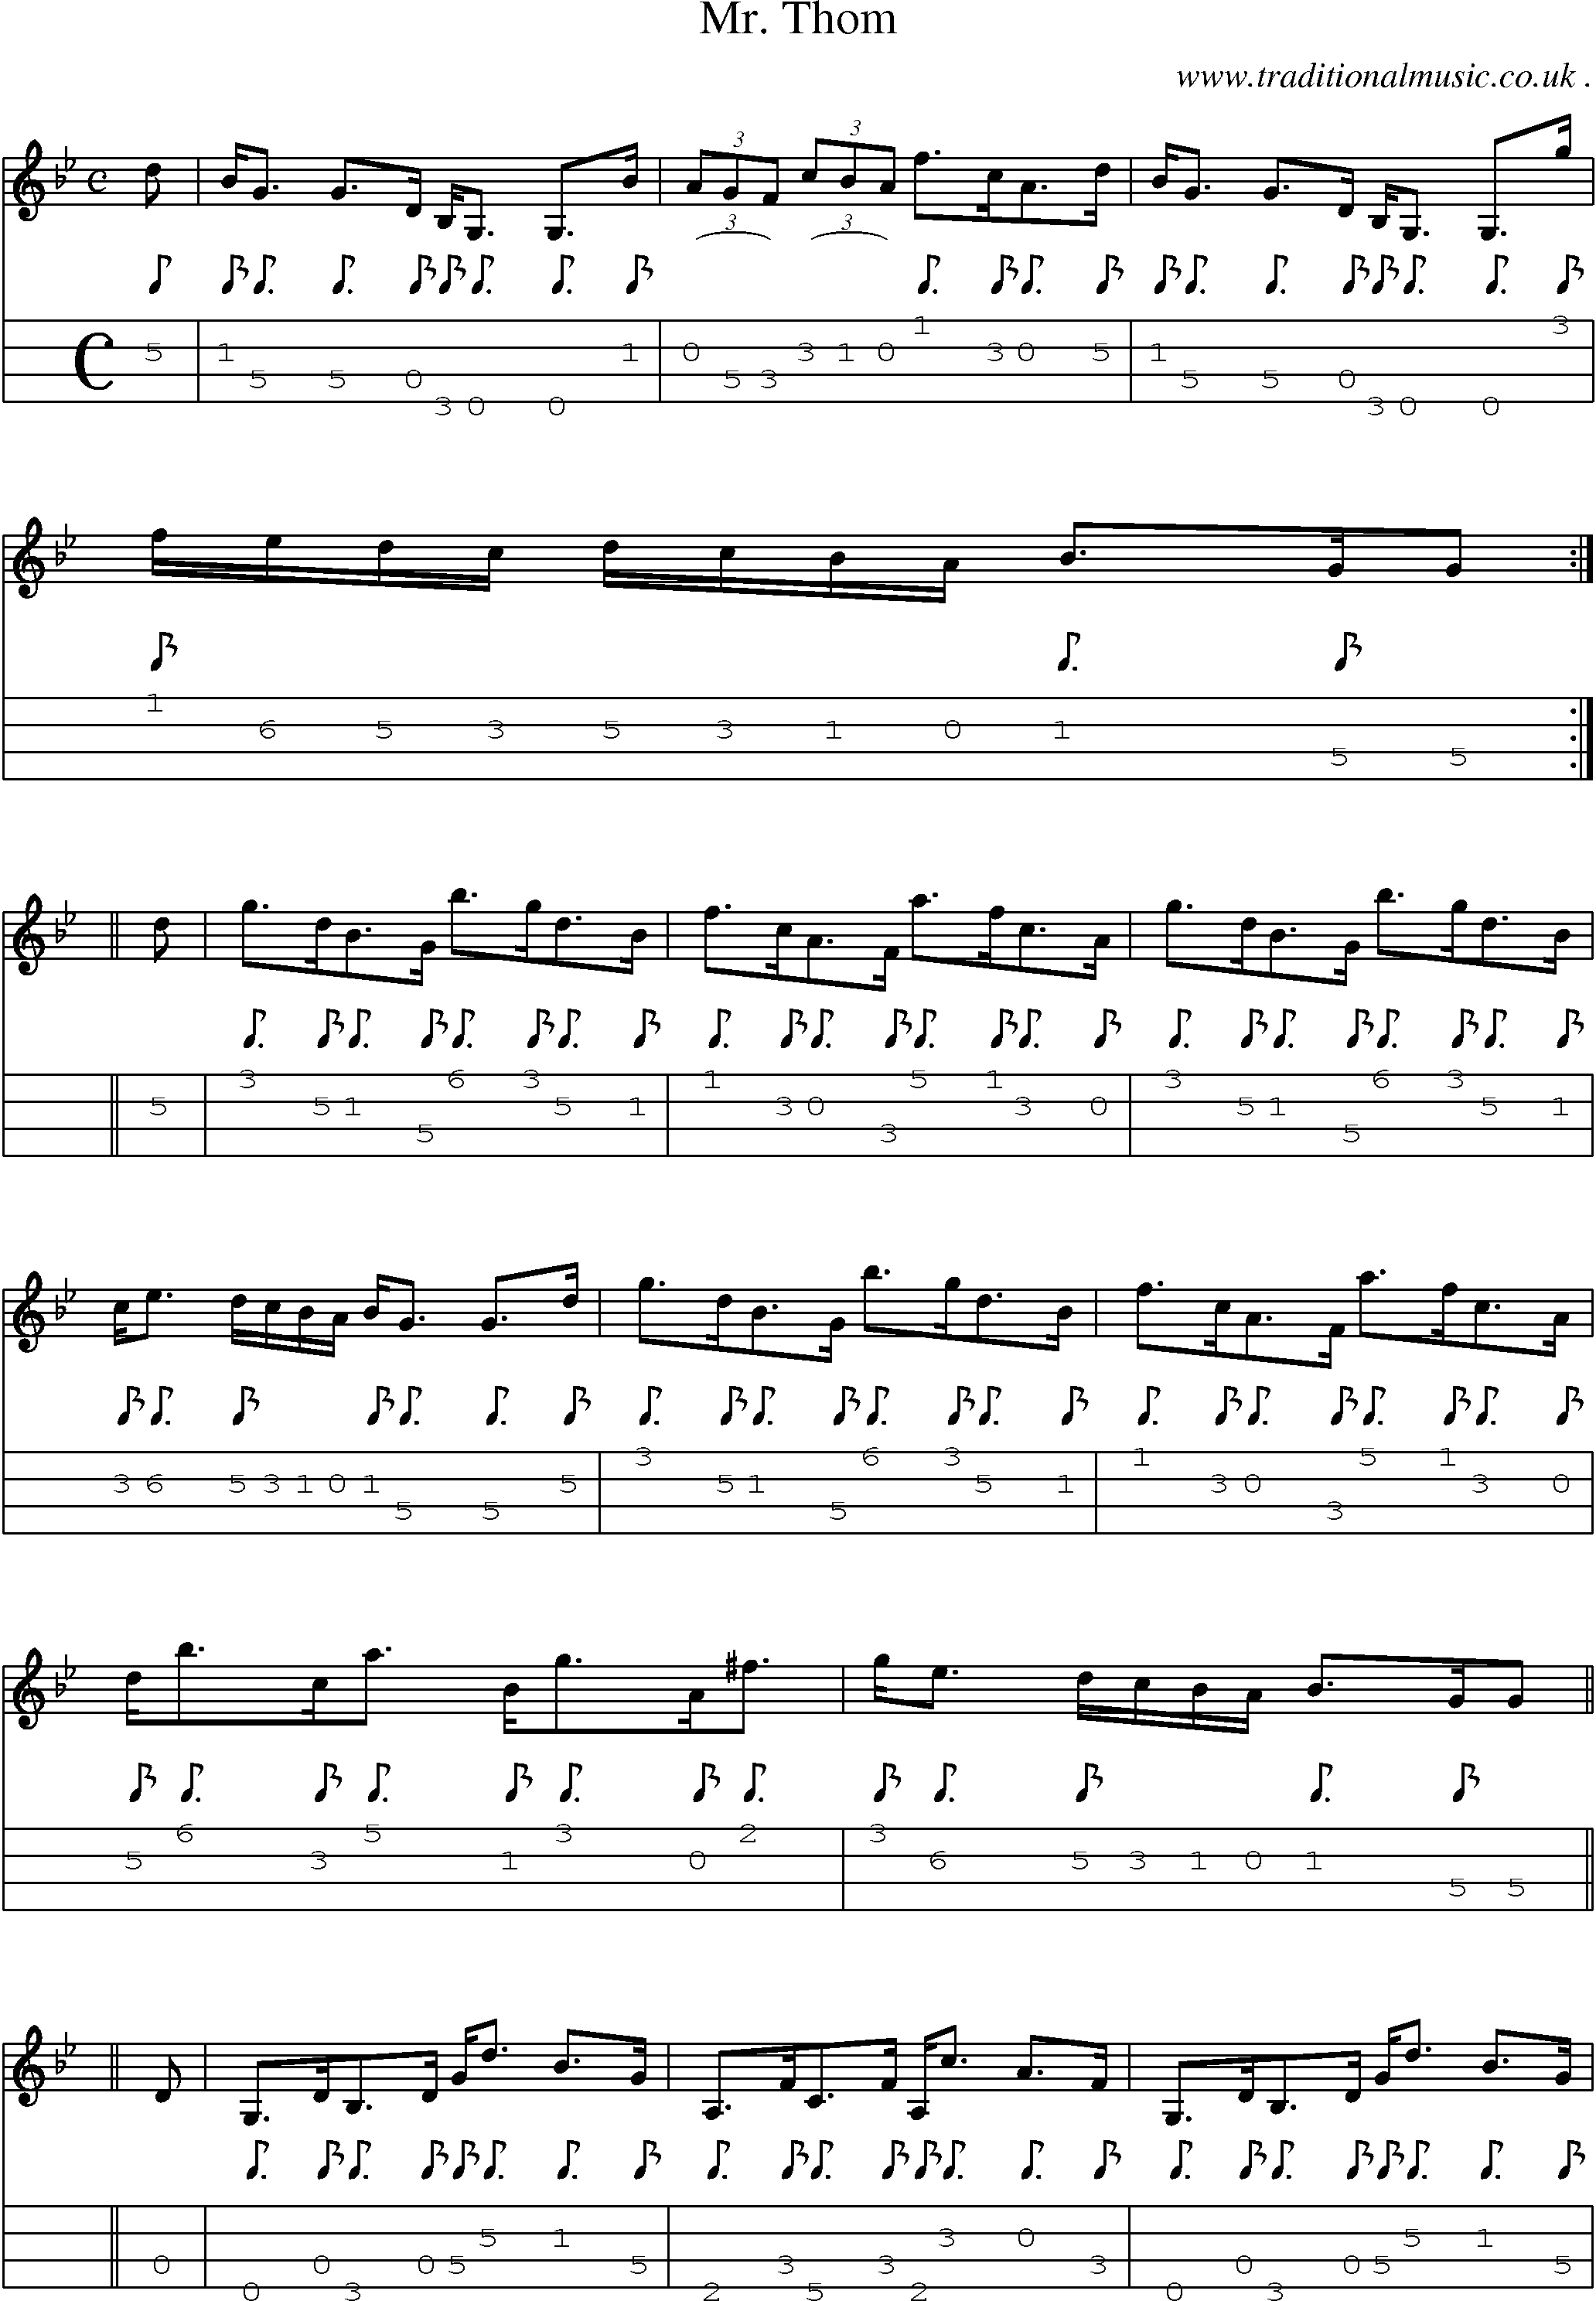 Sheet-music  score, Chords and Mandolin Tabs for Mr Thom